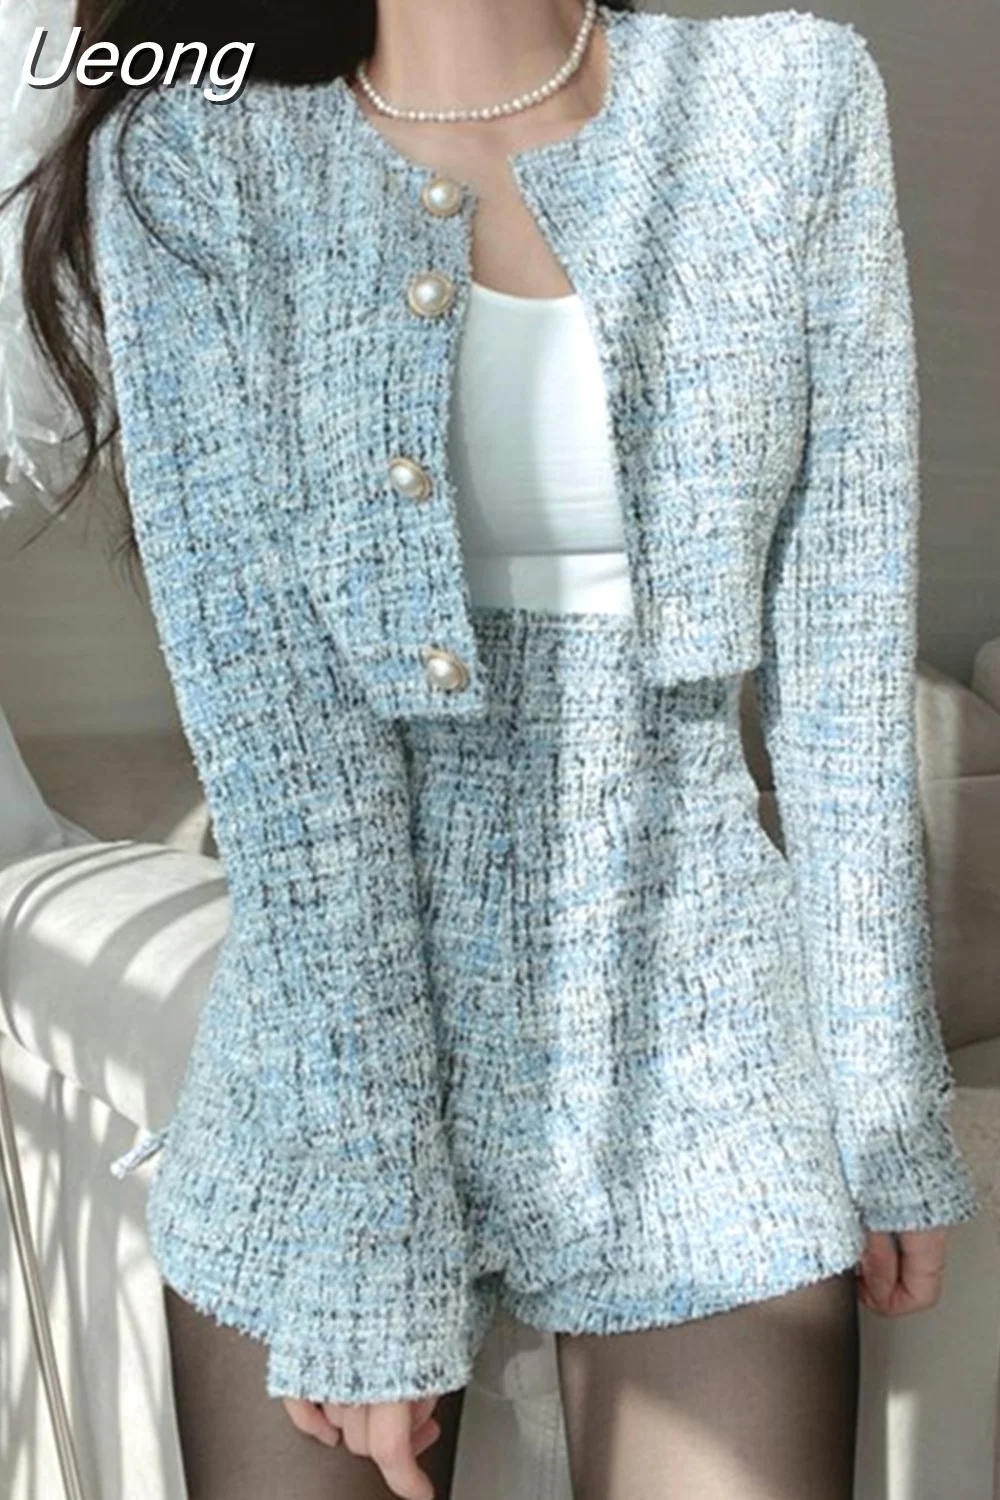 Ueong Fragrant Two Piece Outfit Women Fashion Luxury Plaid Tweed Jacket Tops + High Waist Shorts Suits Sets Woman Clothes